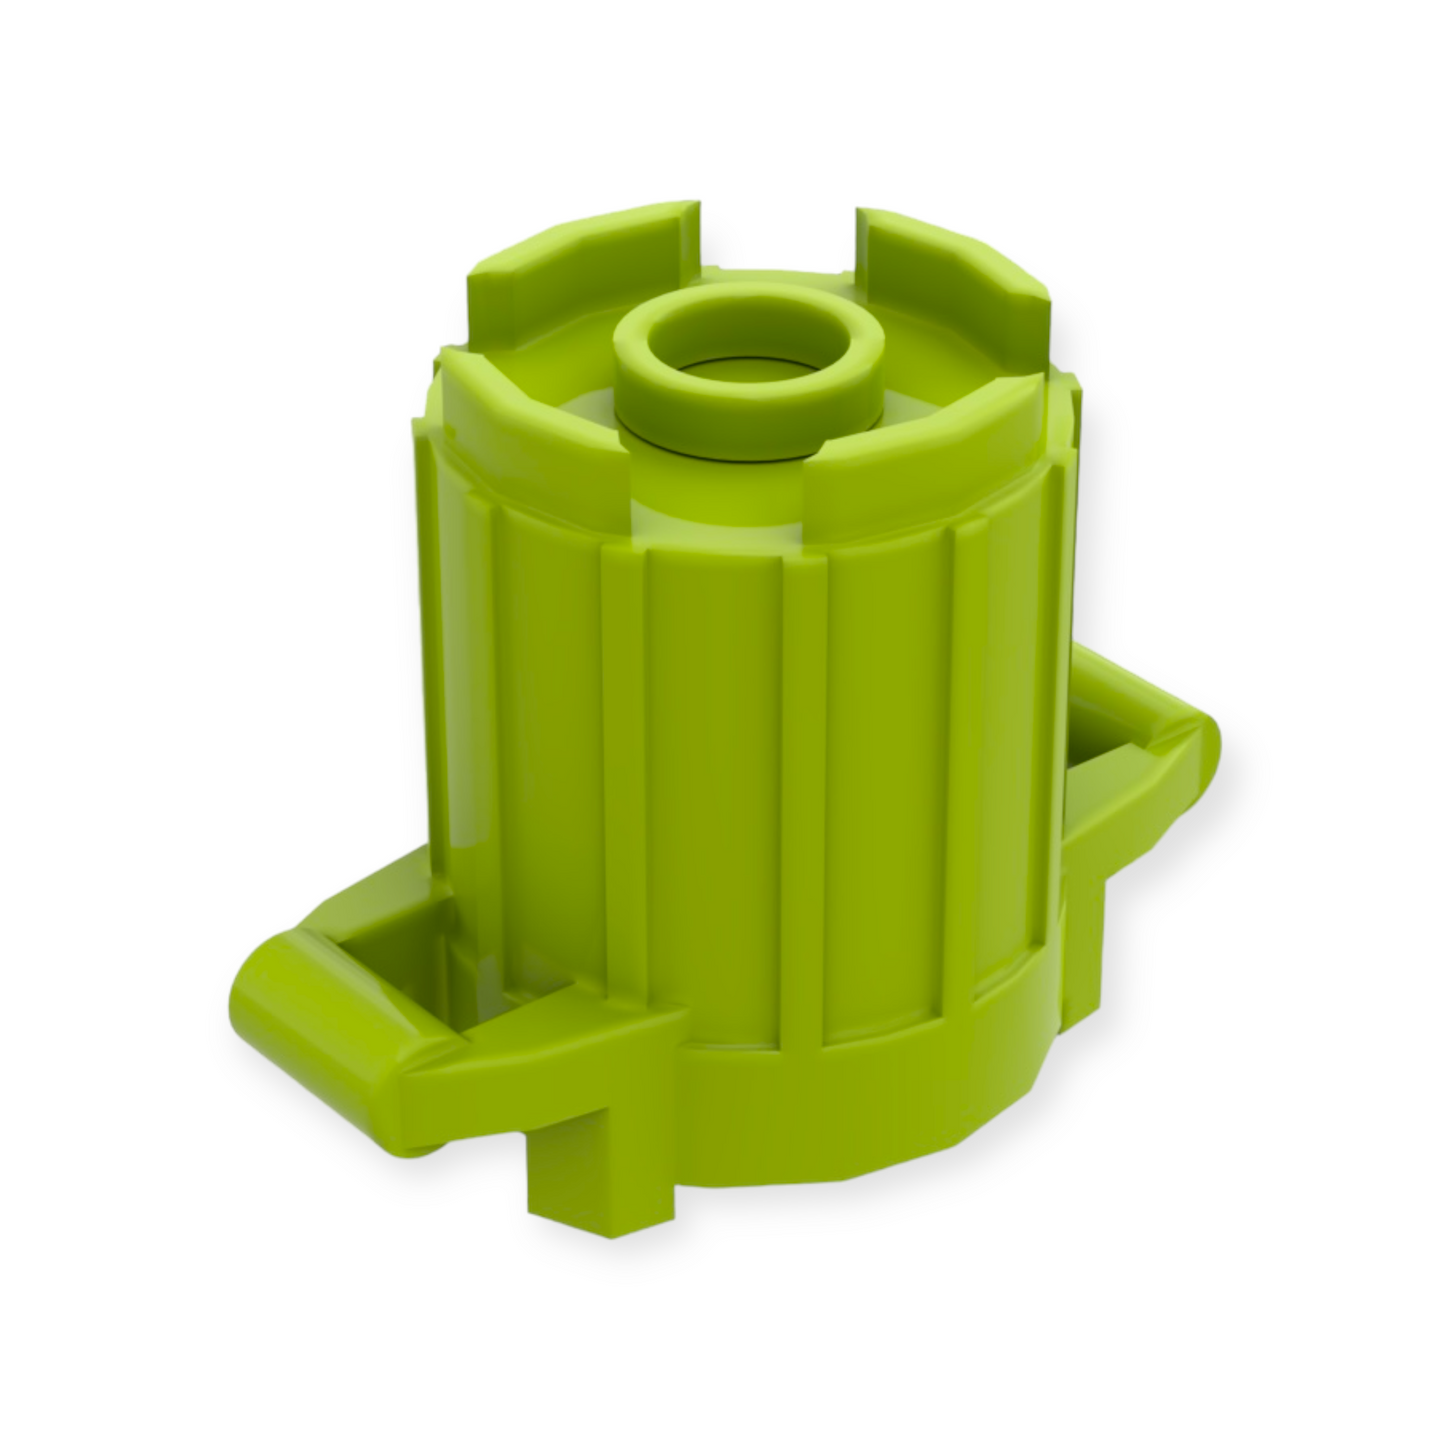 LEGO Container - Mülleimer in Lime